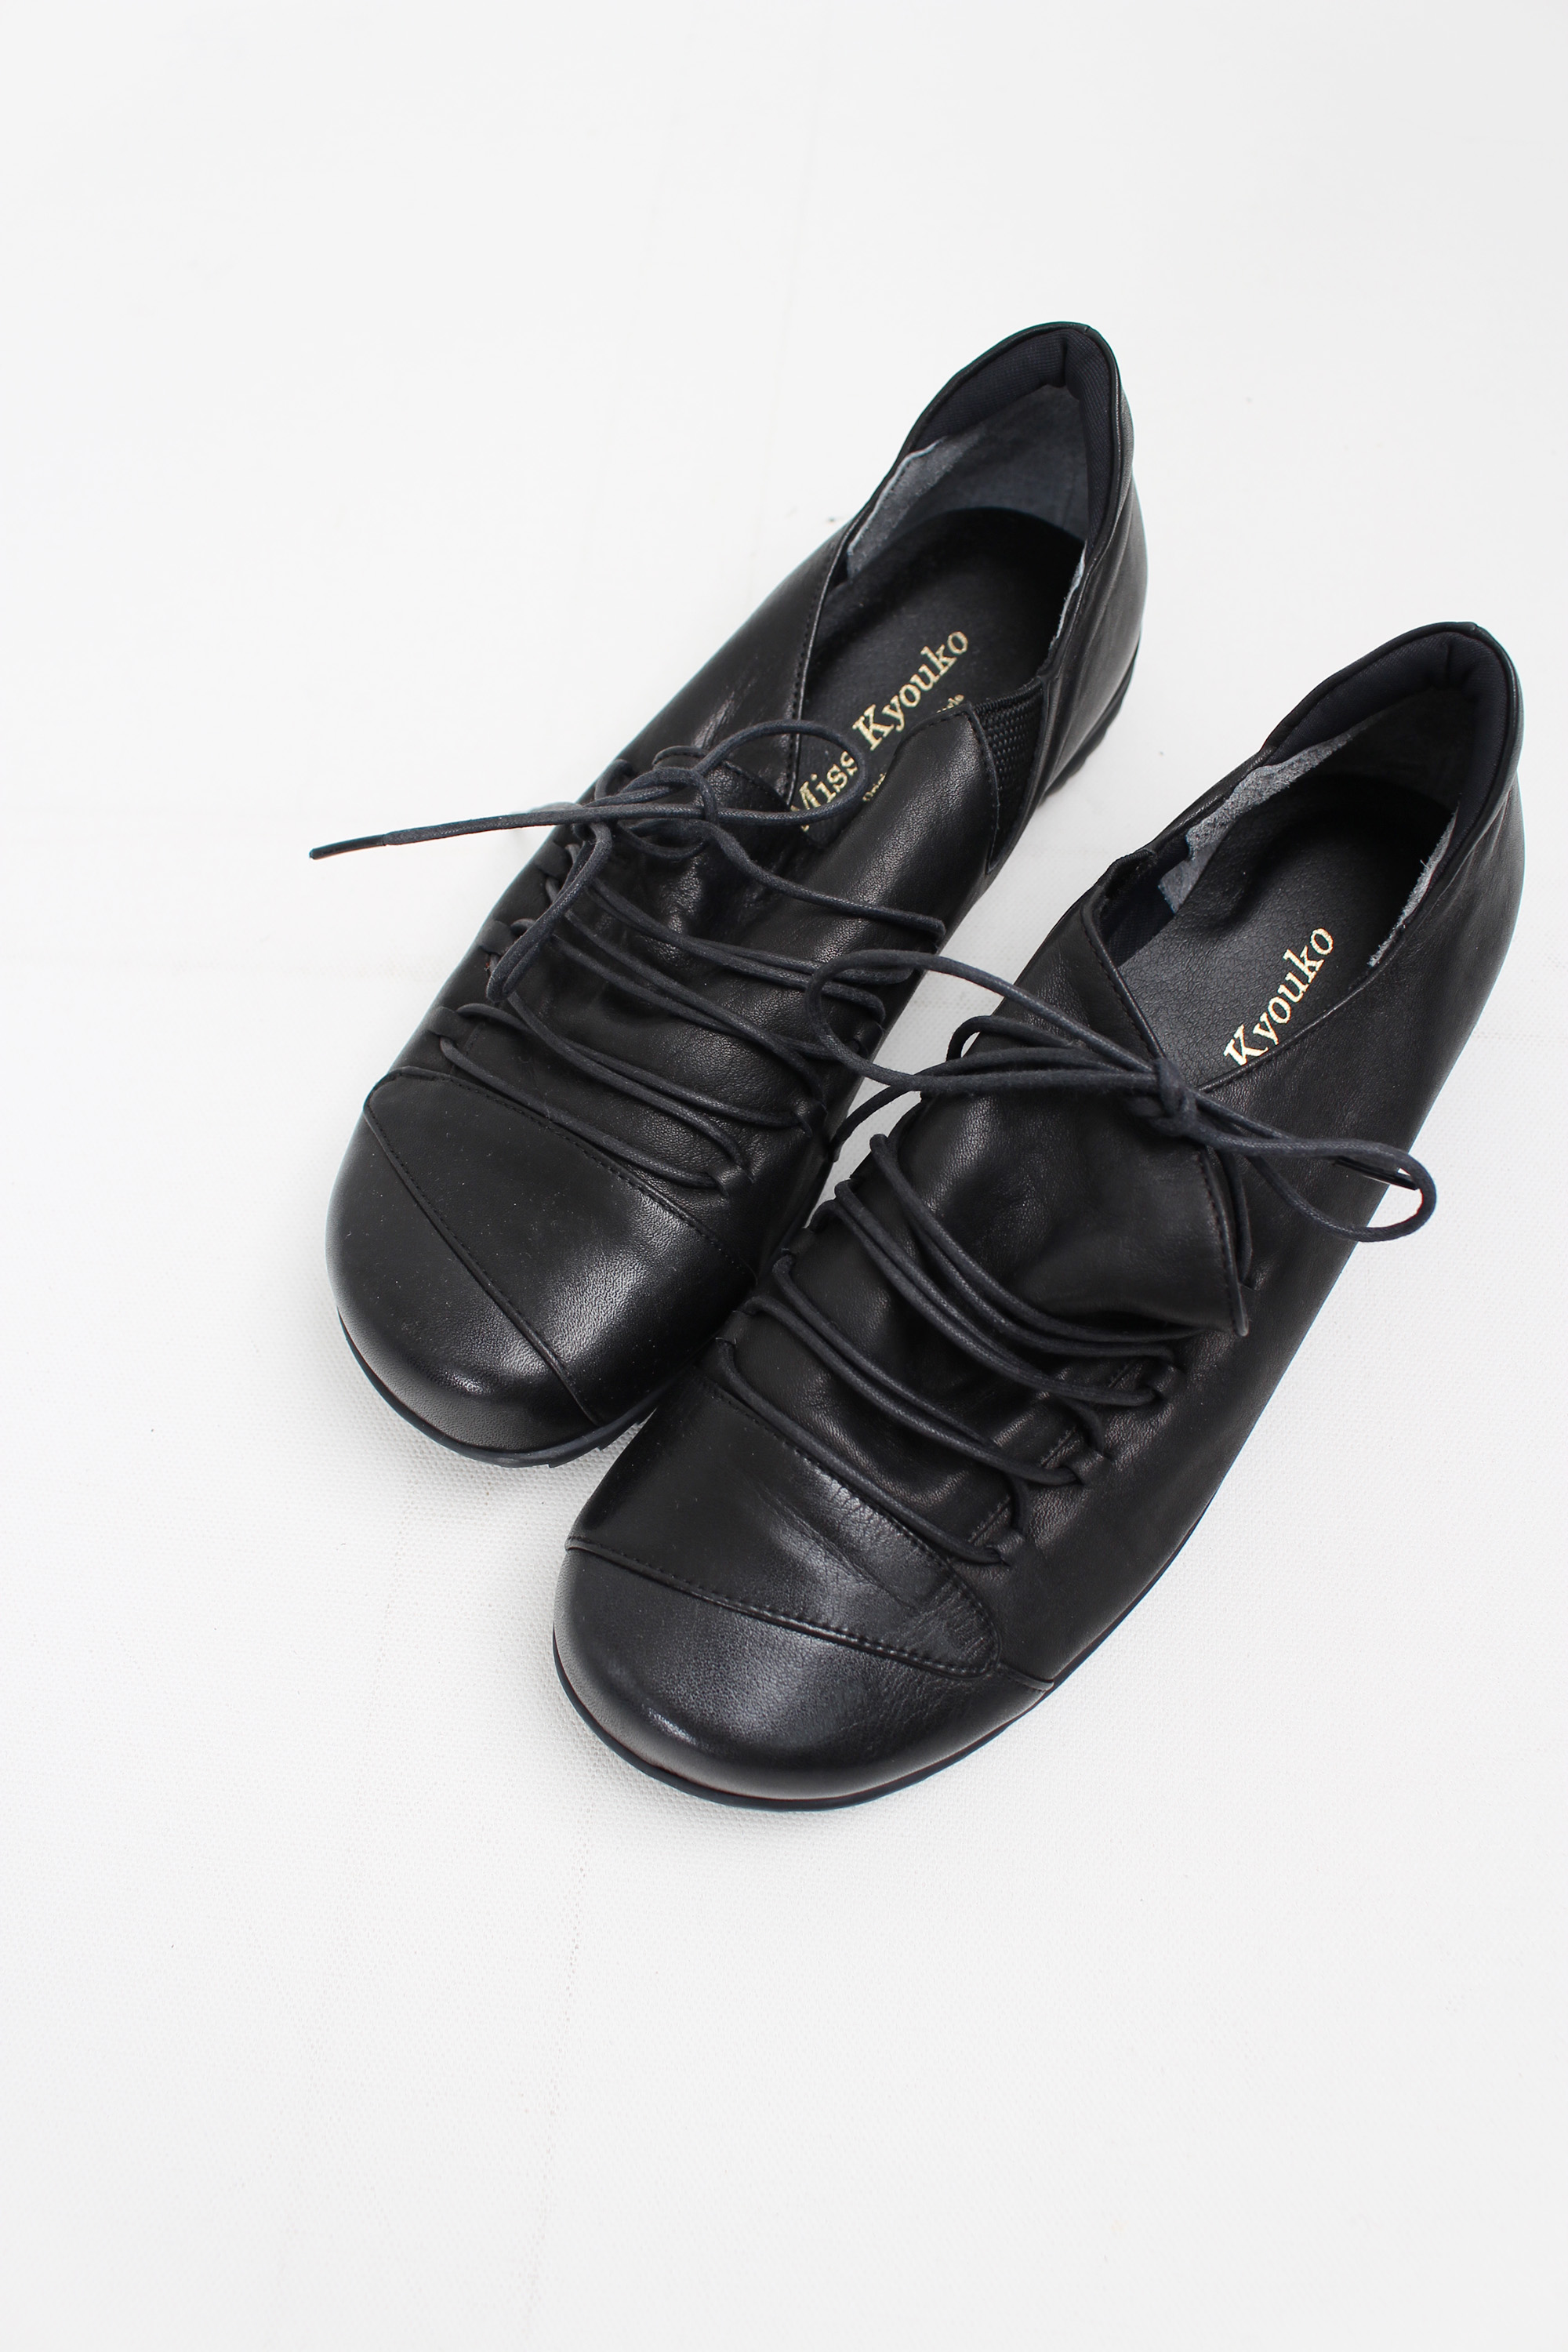 kyouko lace up shoes